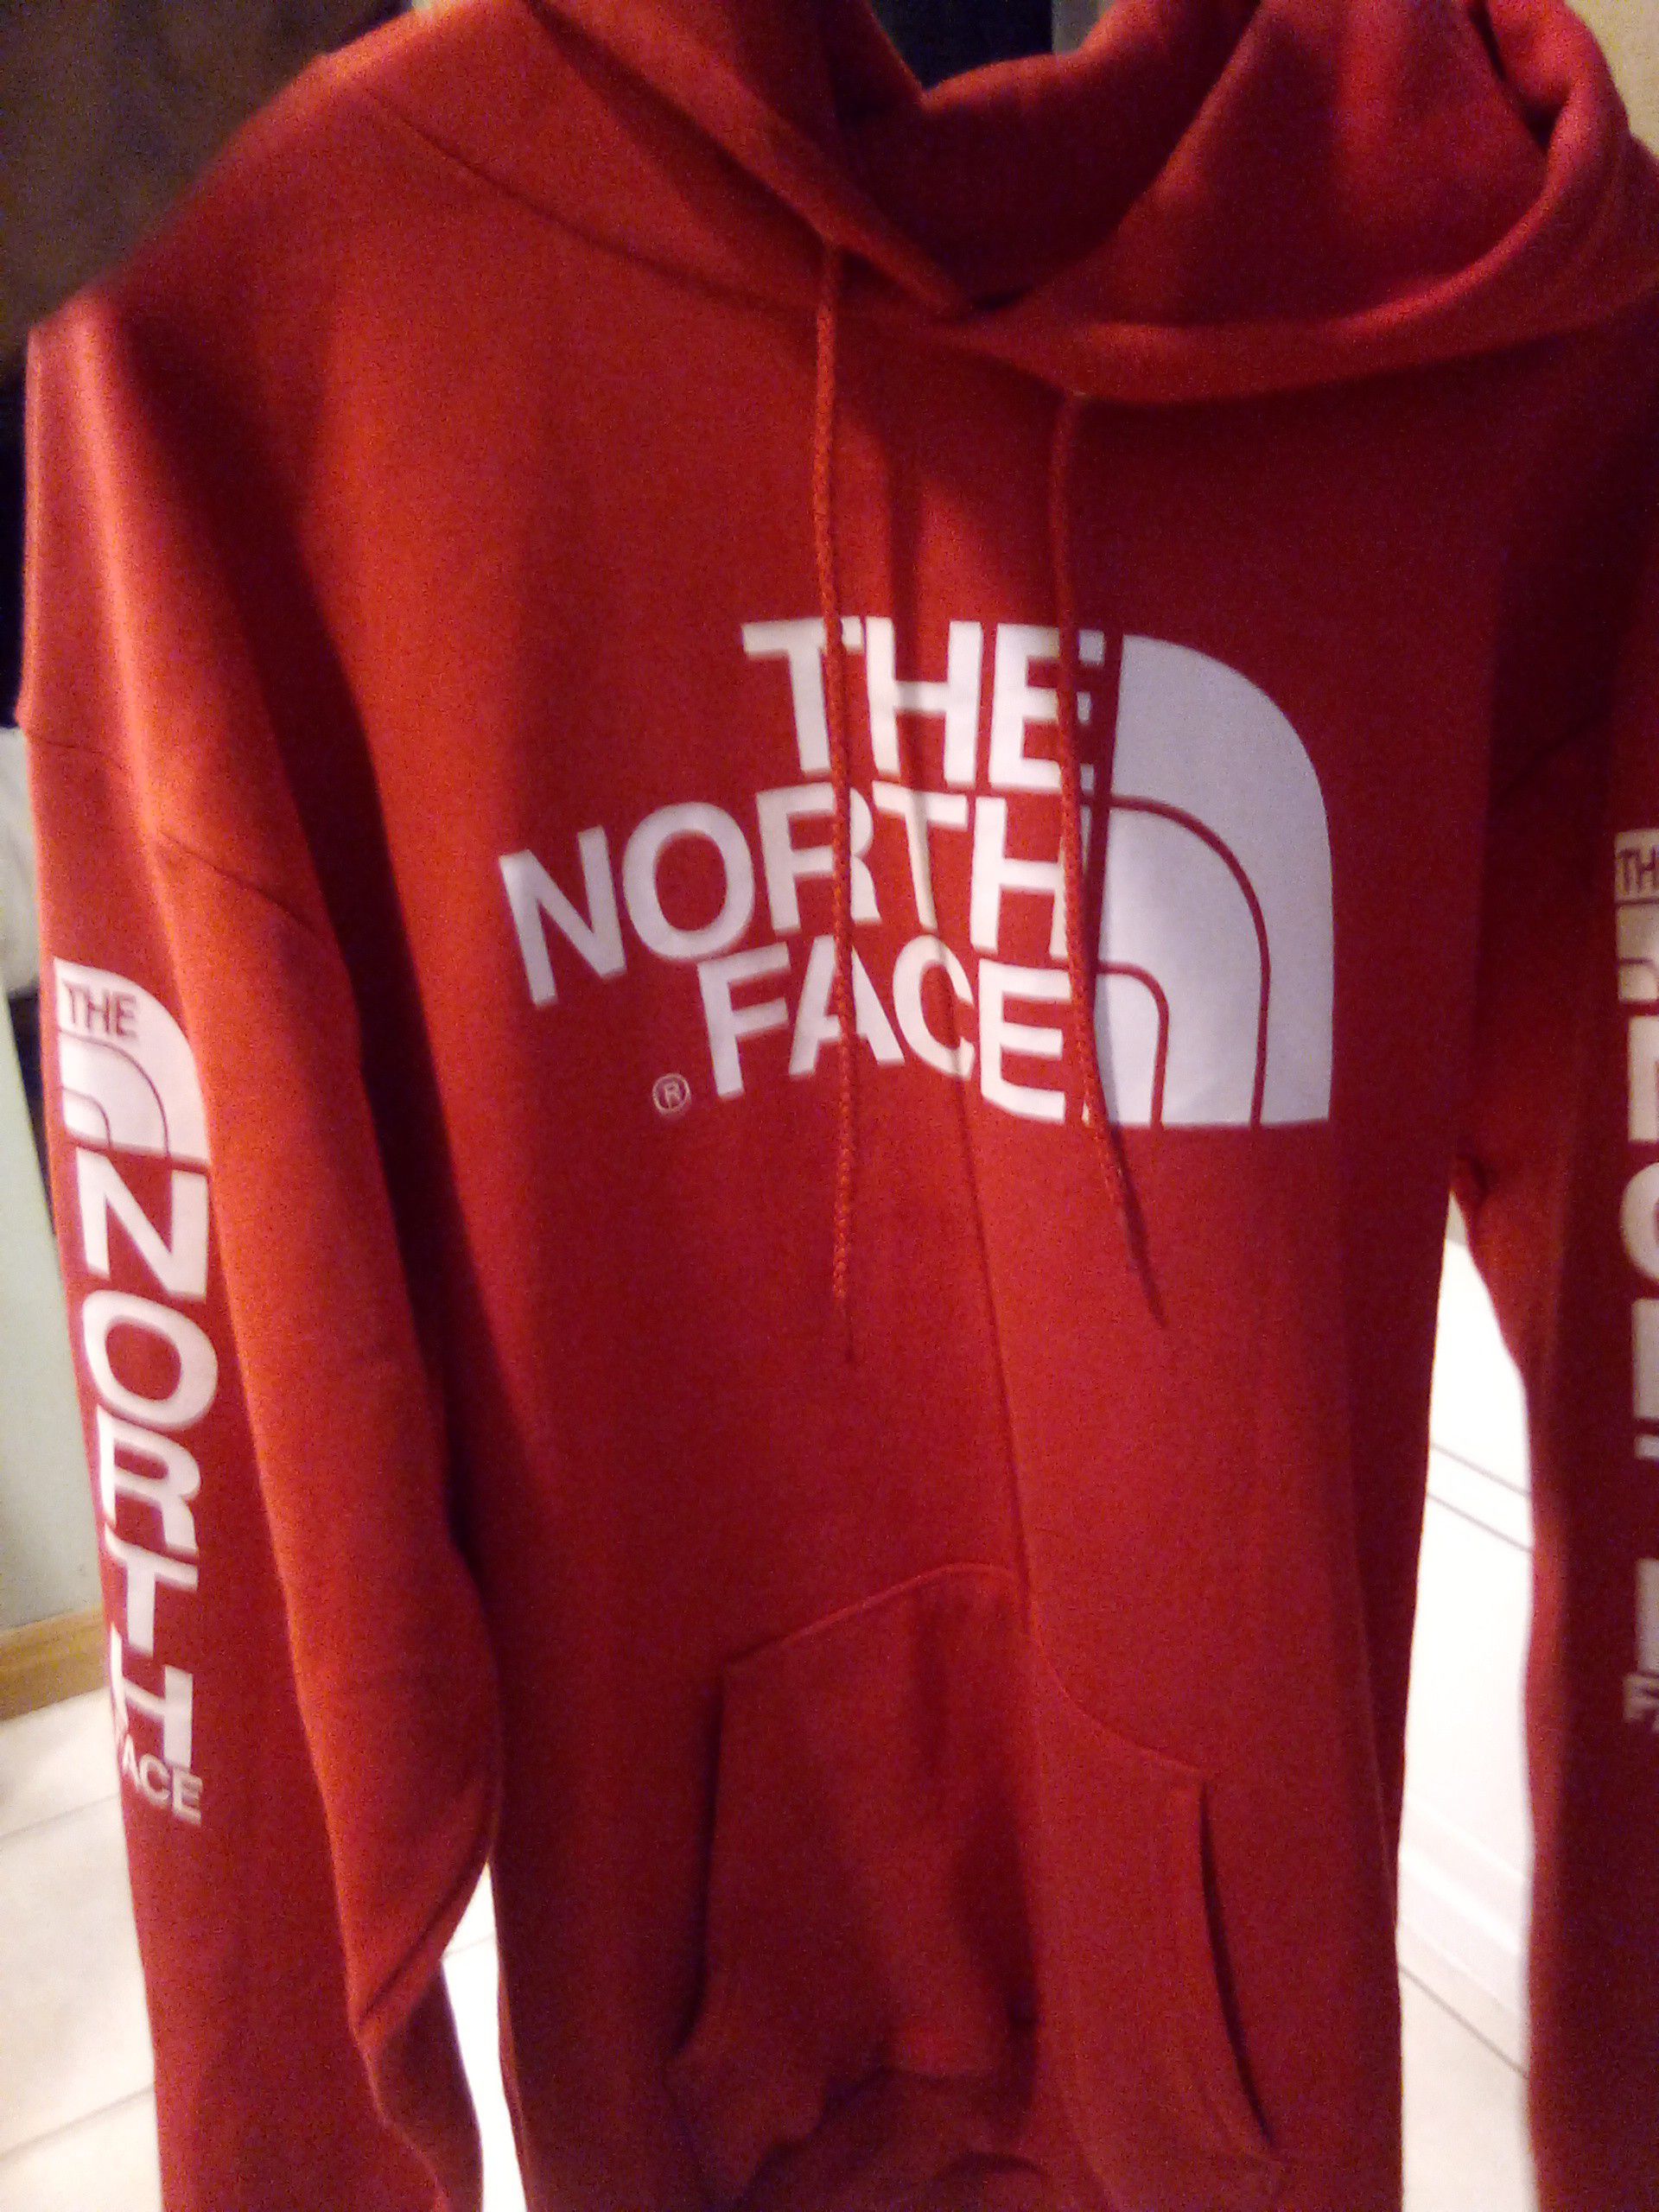 The North Face hoodie men's large in perfect condition